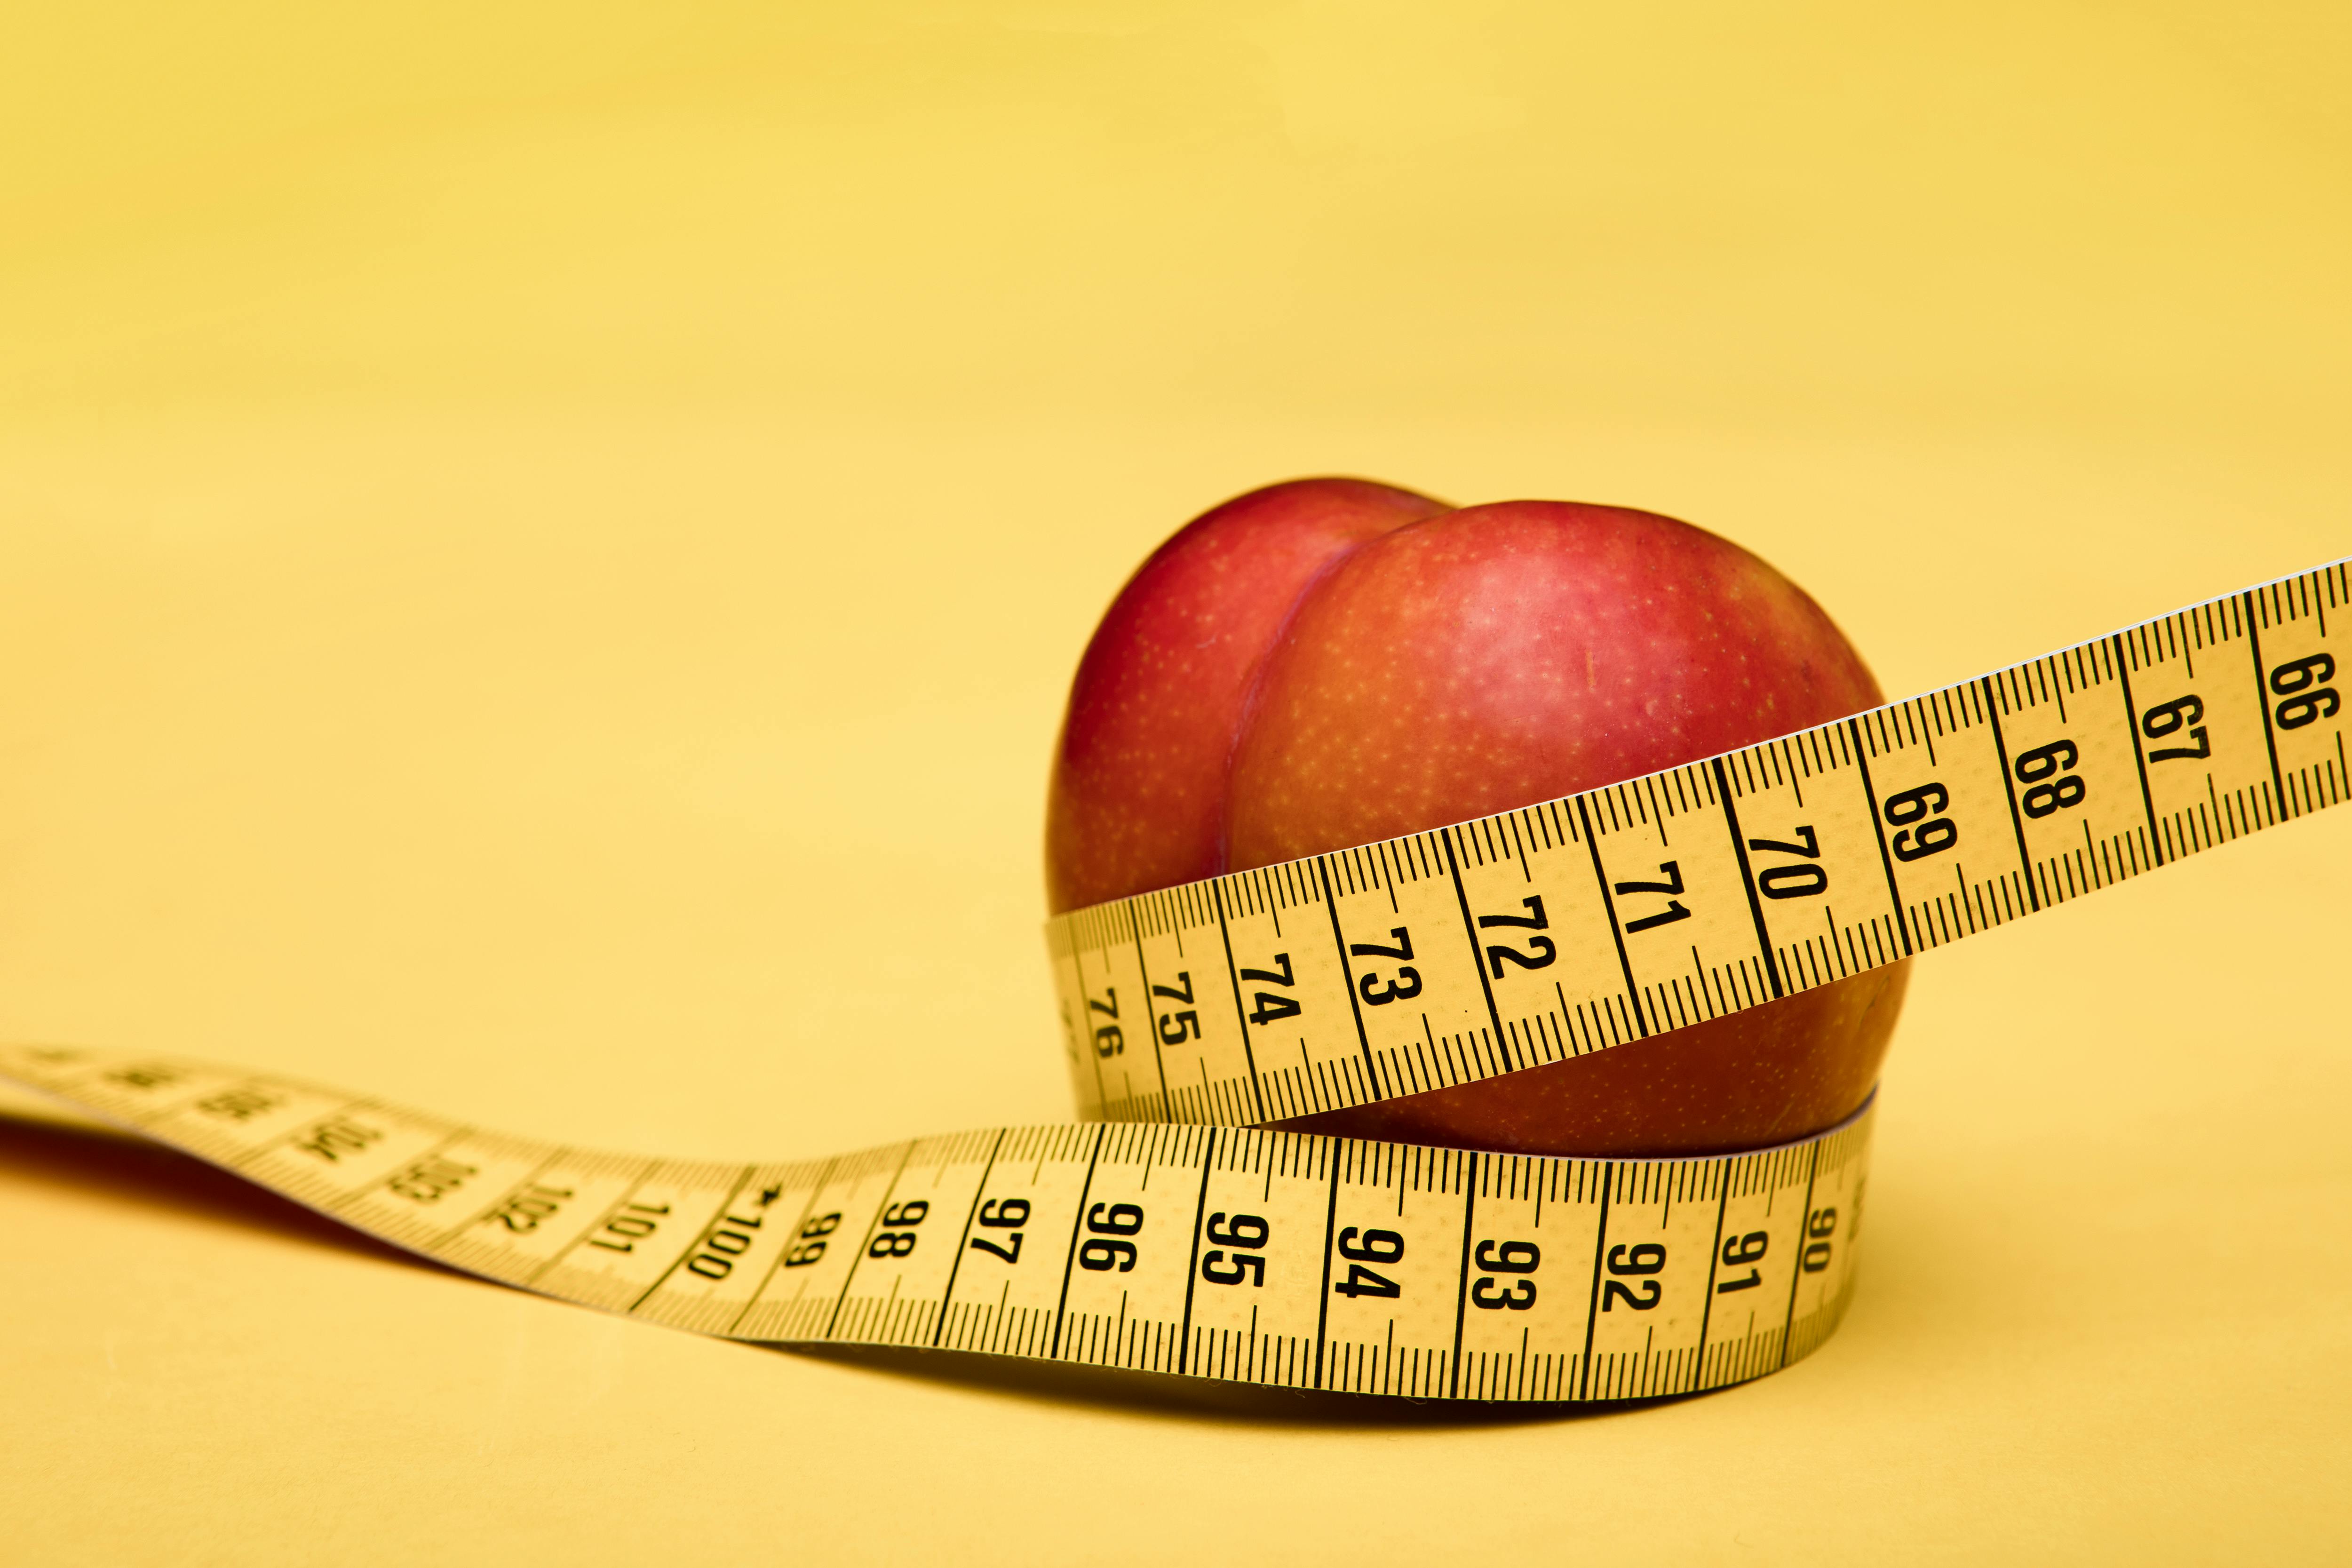 Measuring Tape Wrapped Around A Apple Weight Loss Photo Stock Photo,  Picture and Royalty Free Image. Image 32340153.